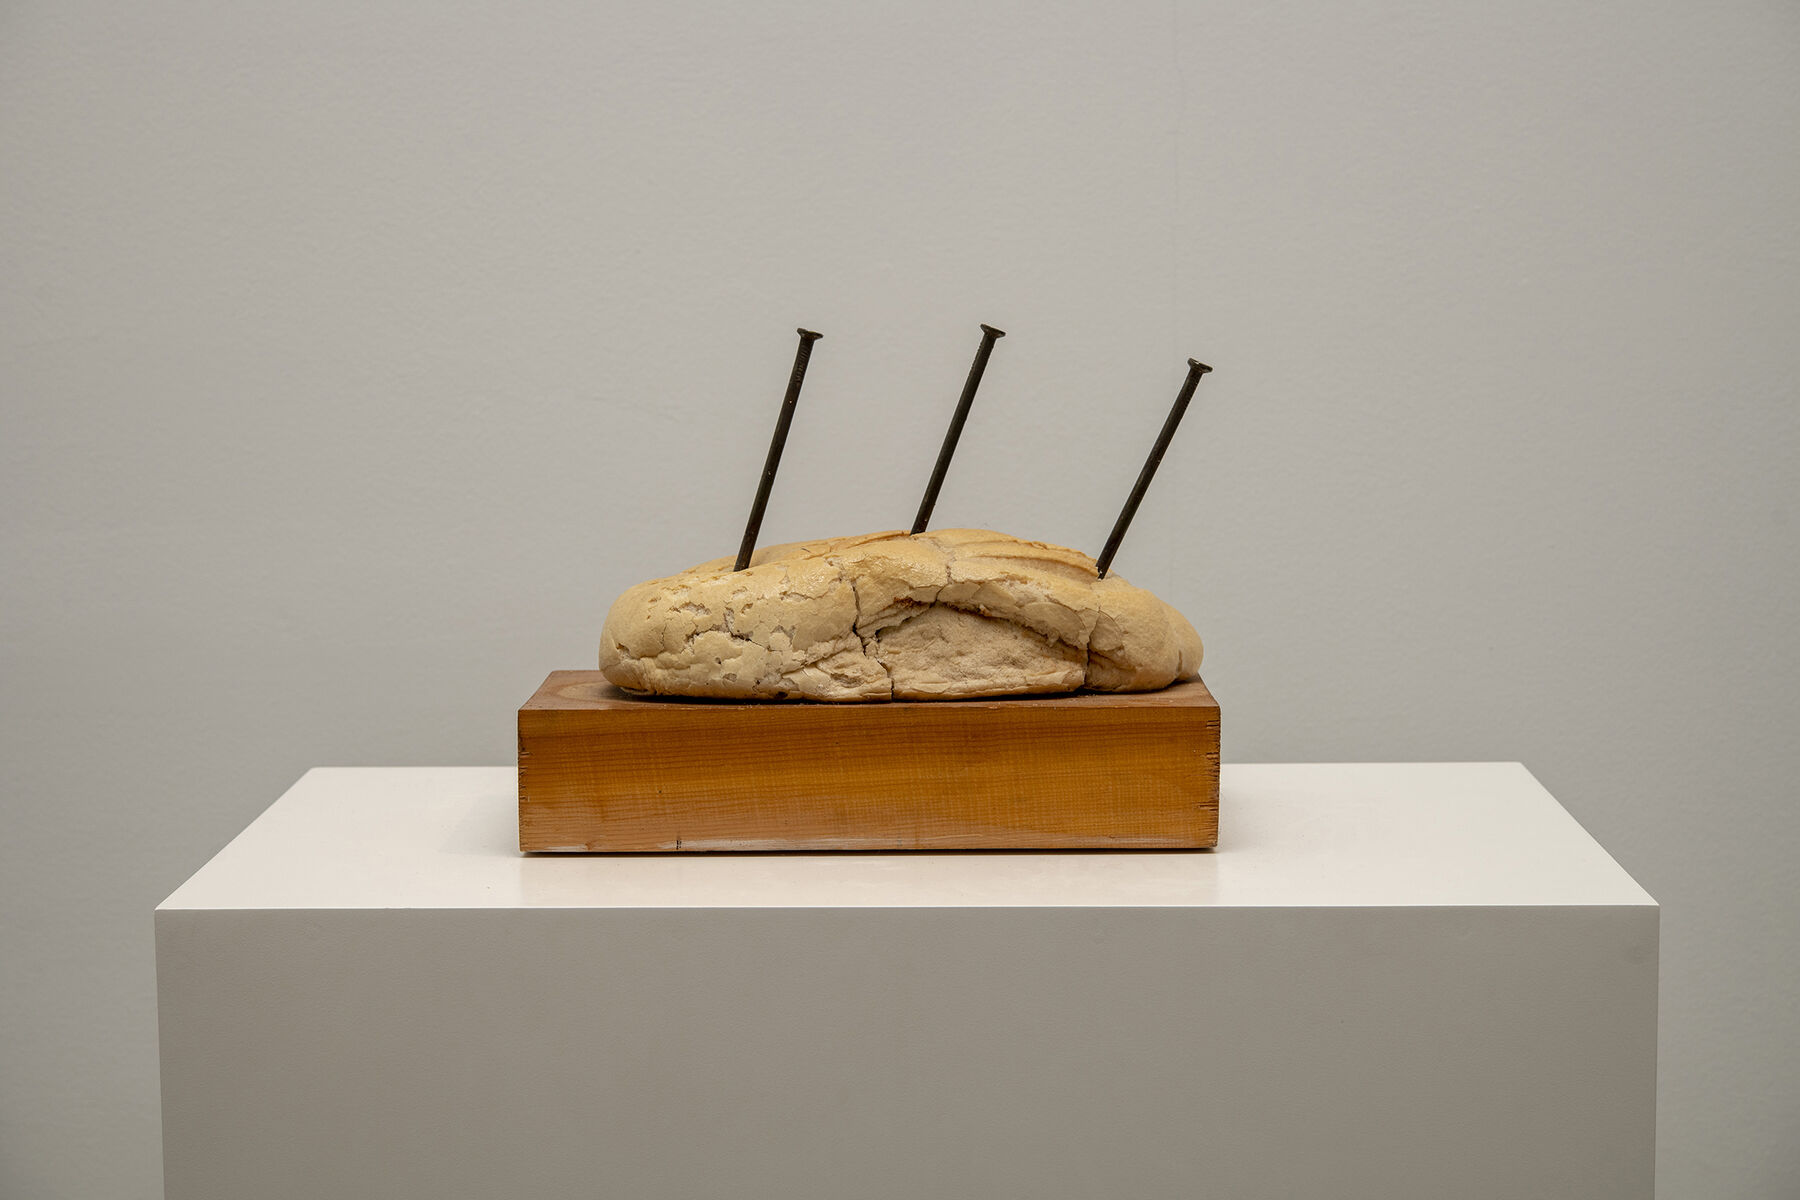 Three long black nails stuck equidistantly into crumbling bread placed upon wooden slab (atop plinth)